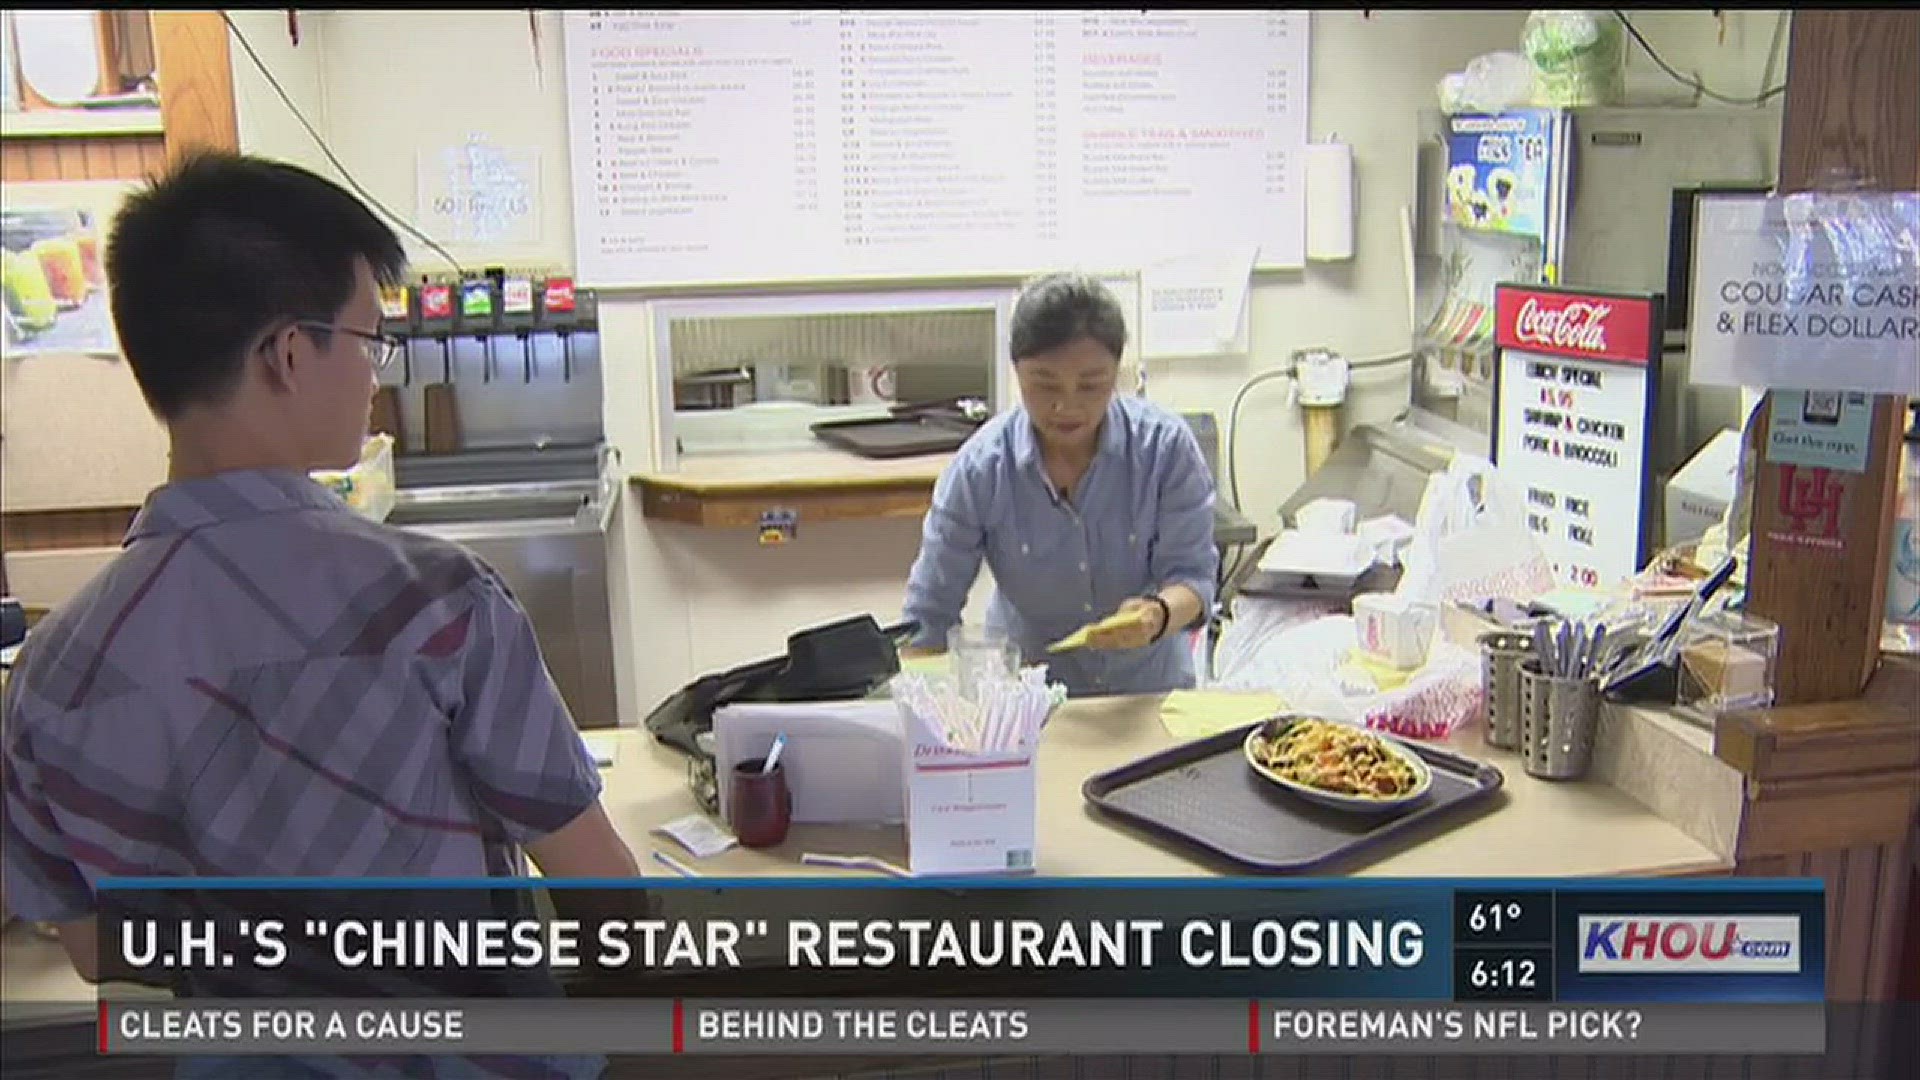 The beloved Chinese Star restaurant on the campus of the University of Houston is closing after the university decided not to renew the restaurant's lease.